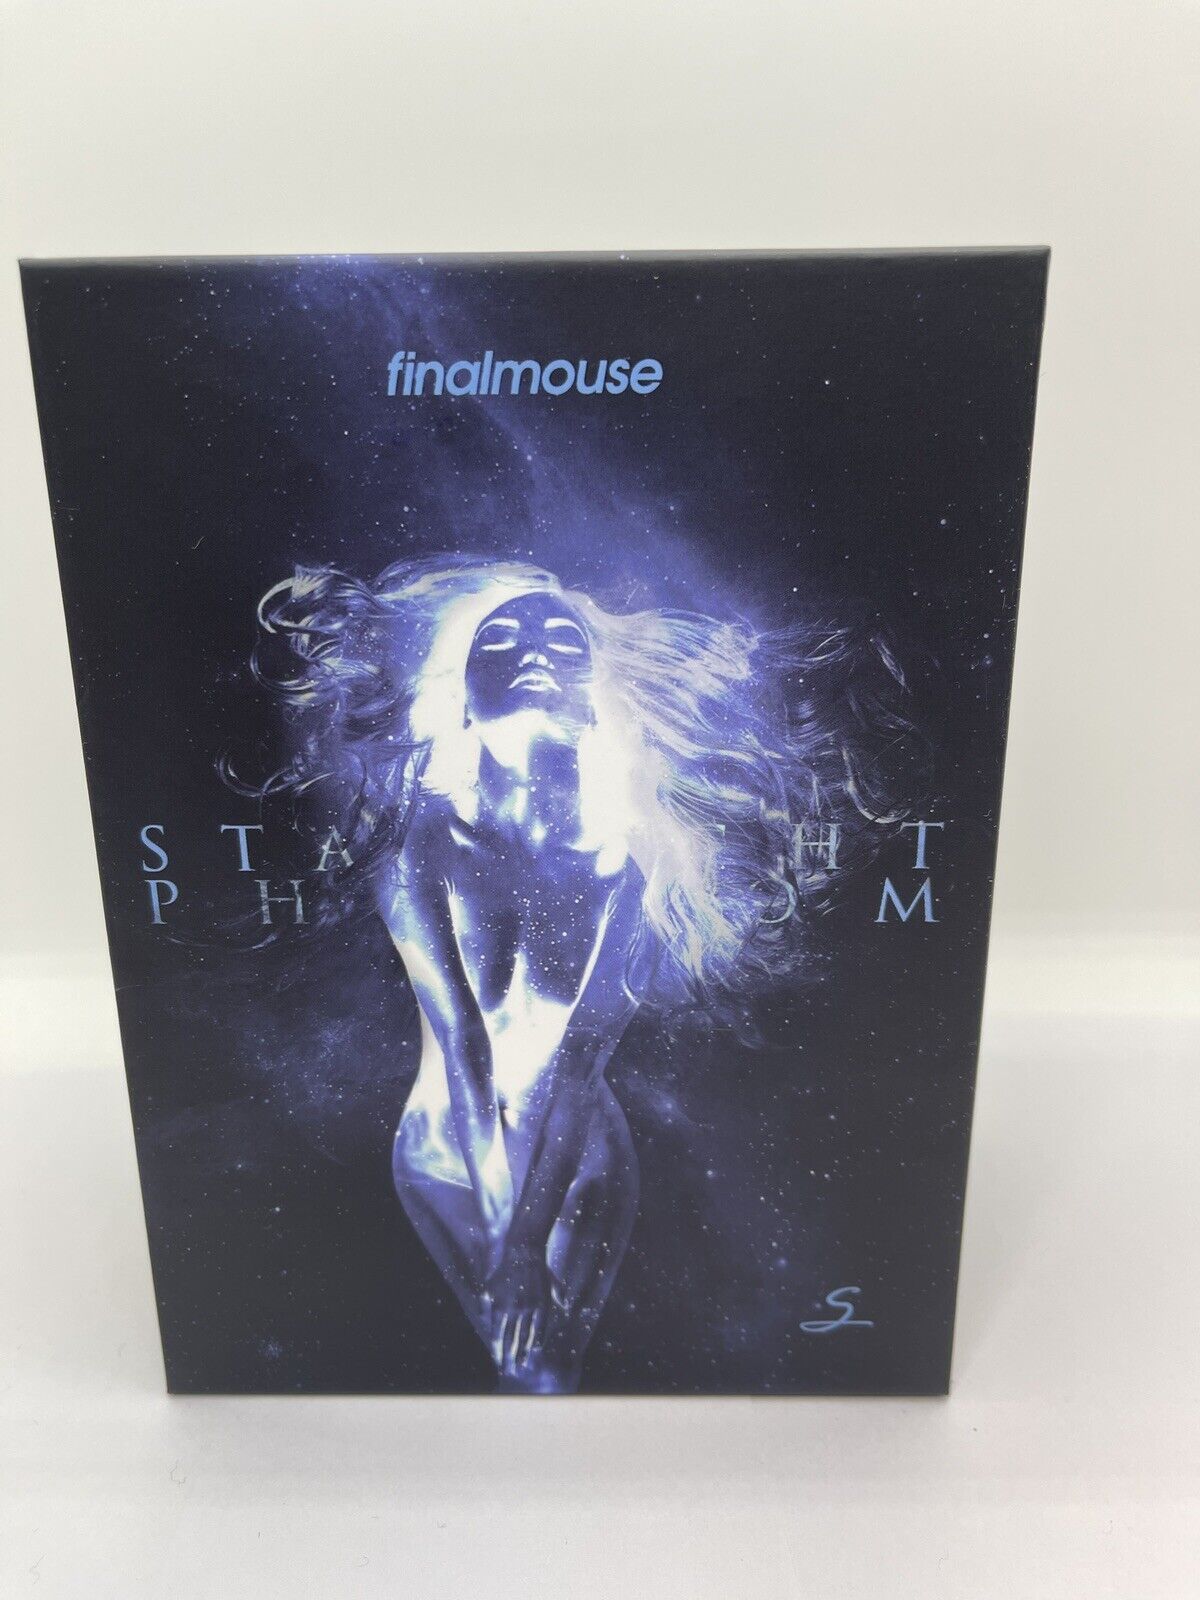 Finalmouse Starlight-12 Phantom Size Small - BRAND NEW SEALED - FAST SHIP